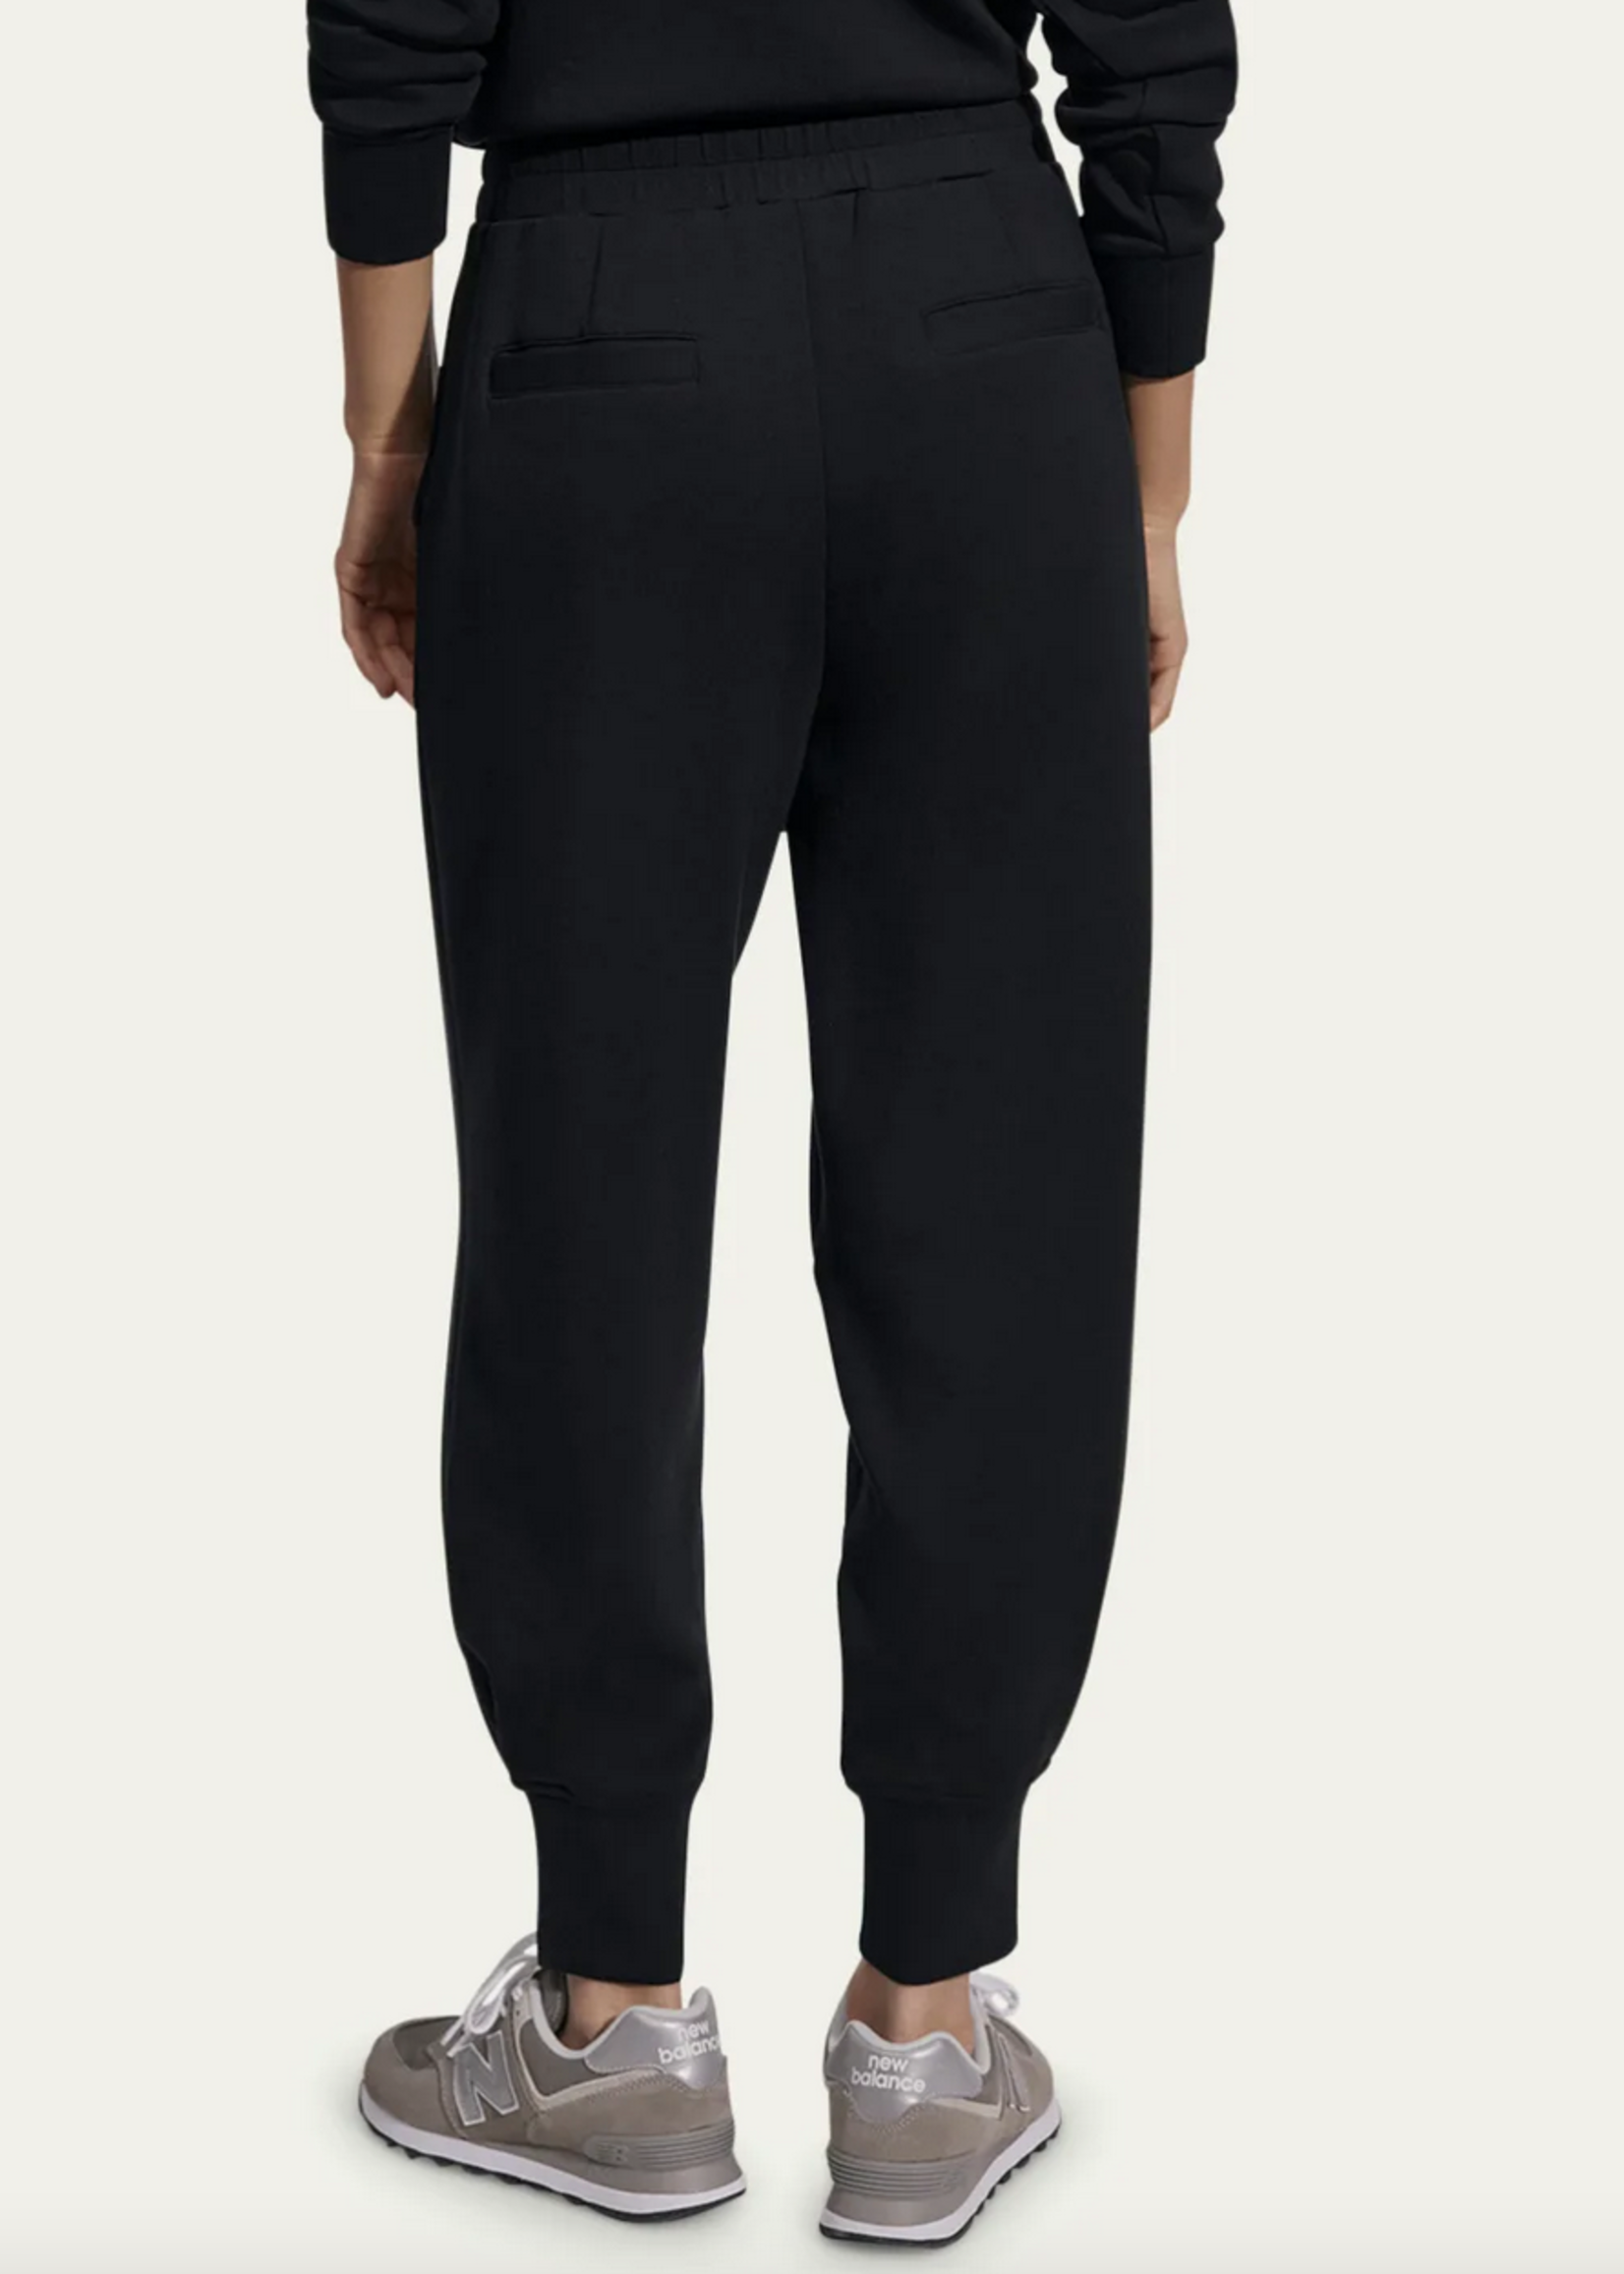 Varley Hyde Relaxed Cuffed Sweatpant- Black